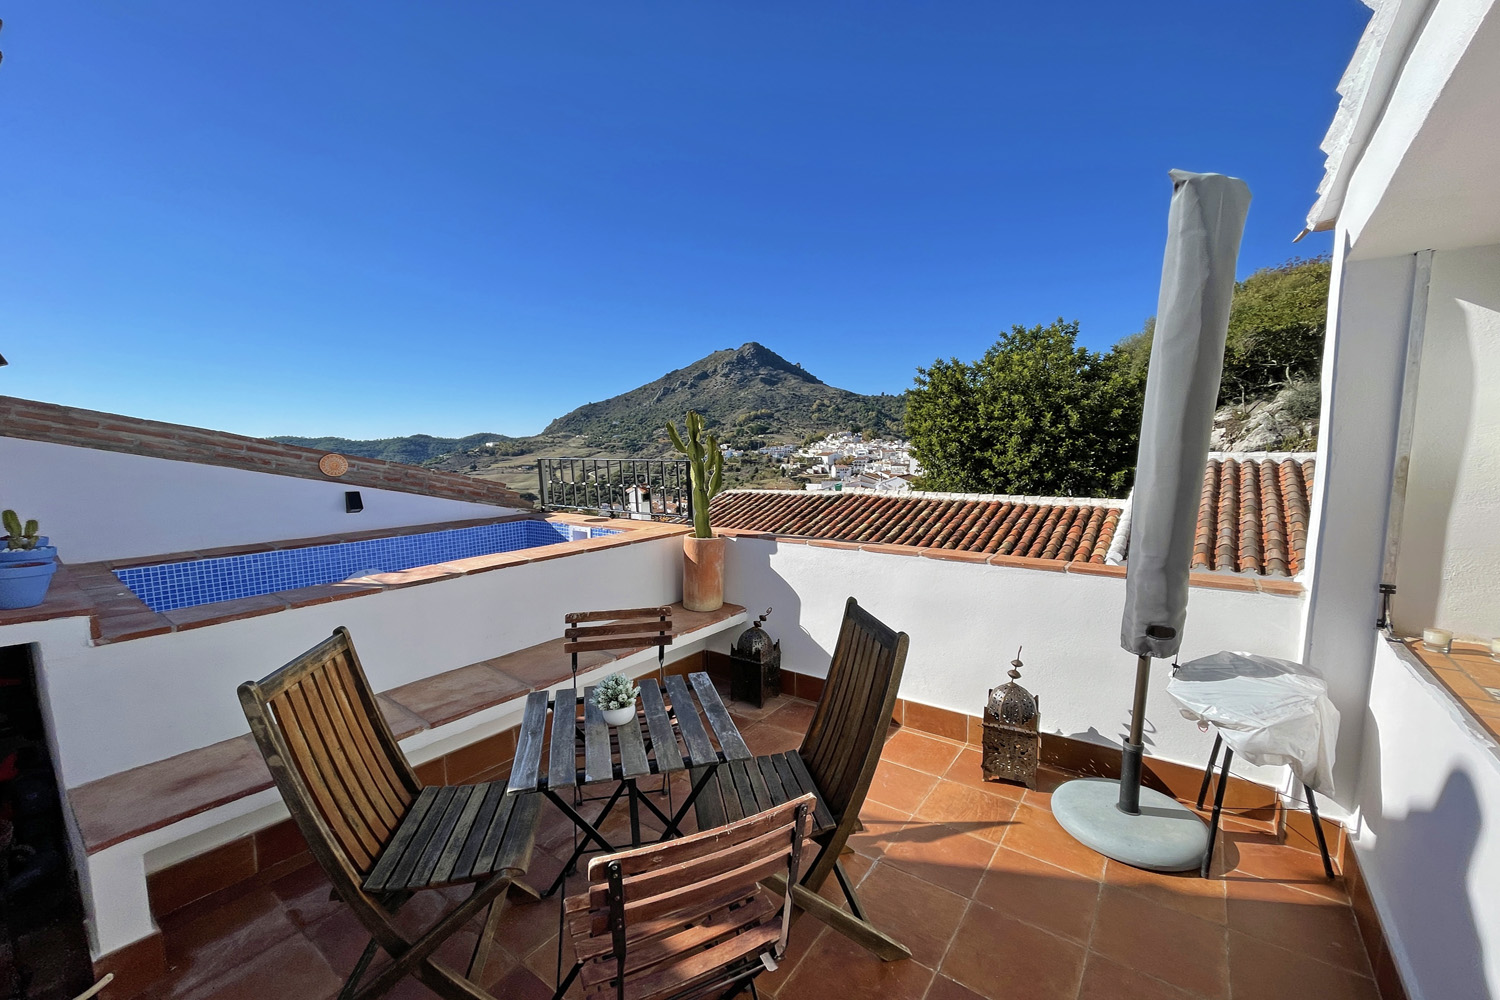 TERRACE WITH PLUNGE POOL & NICE VIEWS